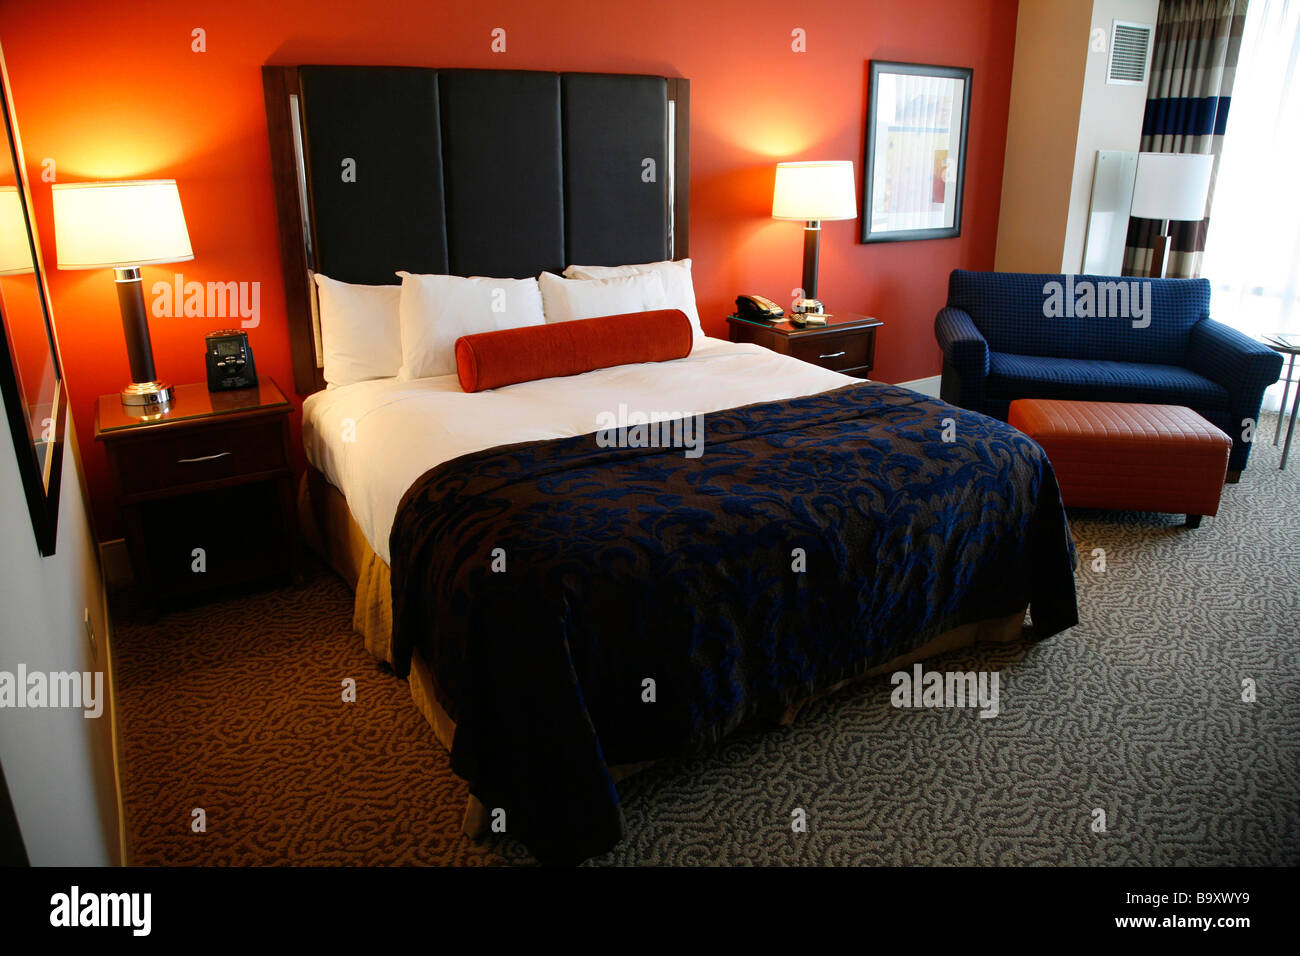 Generic Hotel room bed made up Stock Photo